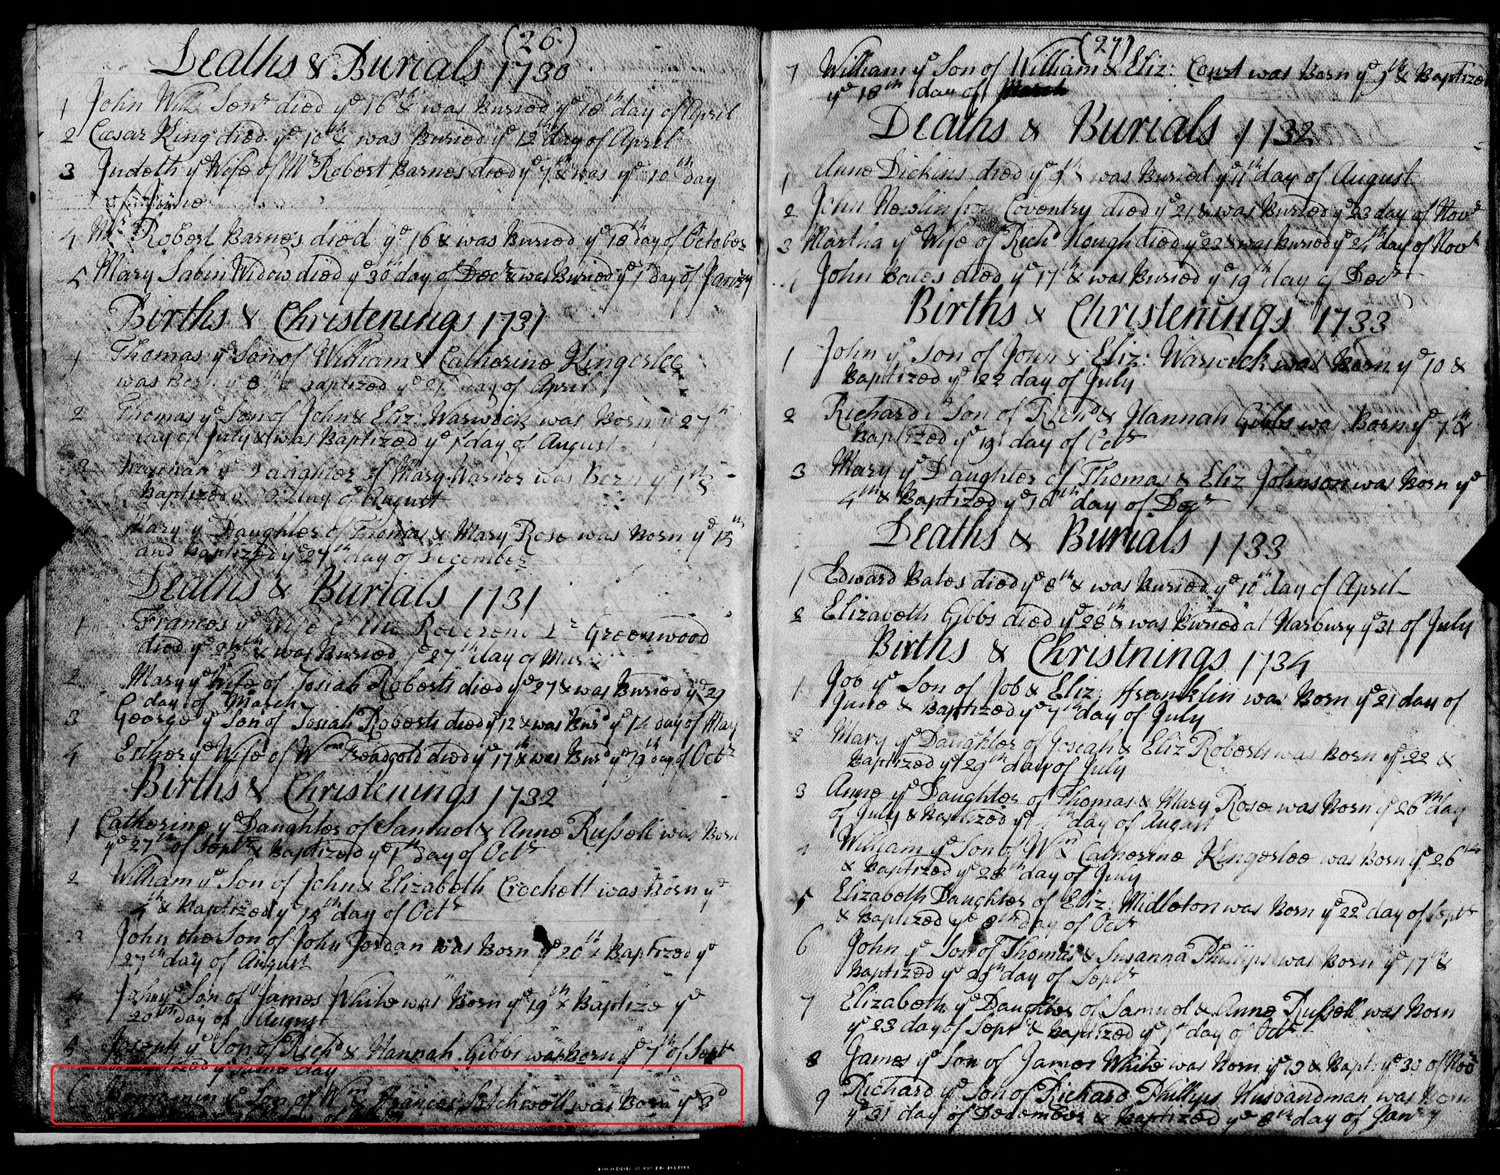 The combined register of All Saints' Leamington Priors 1732 reveals the baptism of Benjamin Satchwell